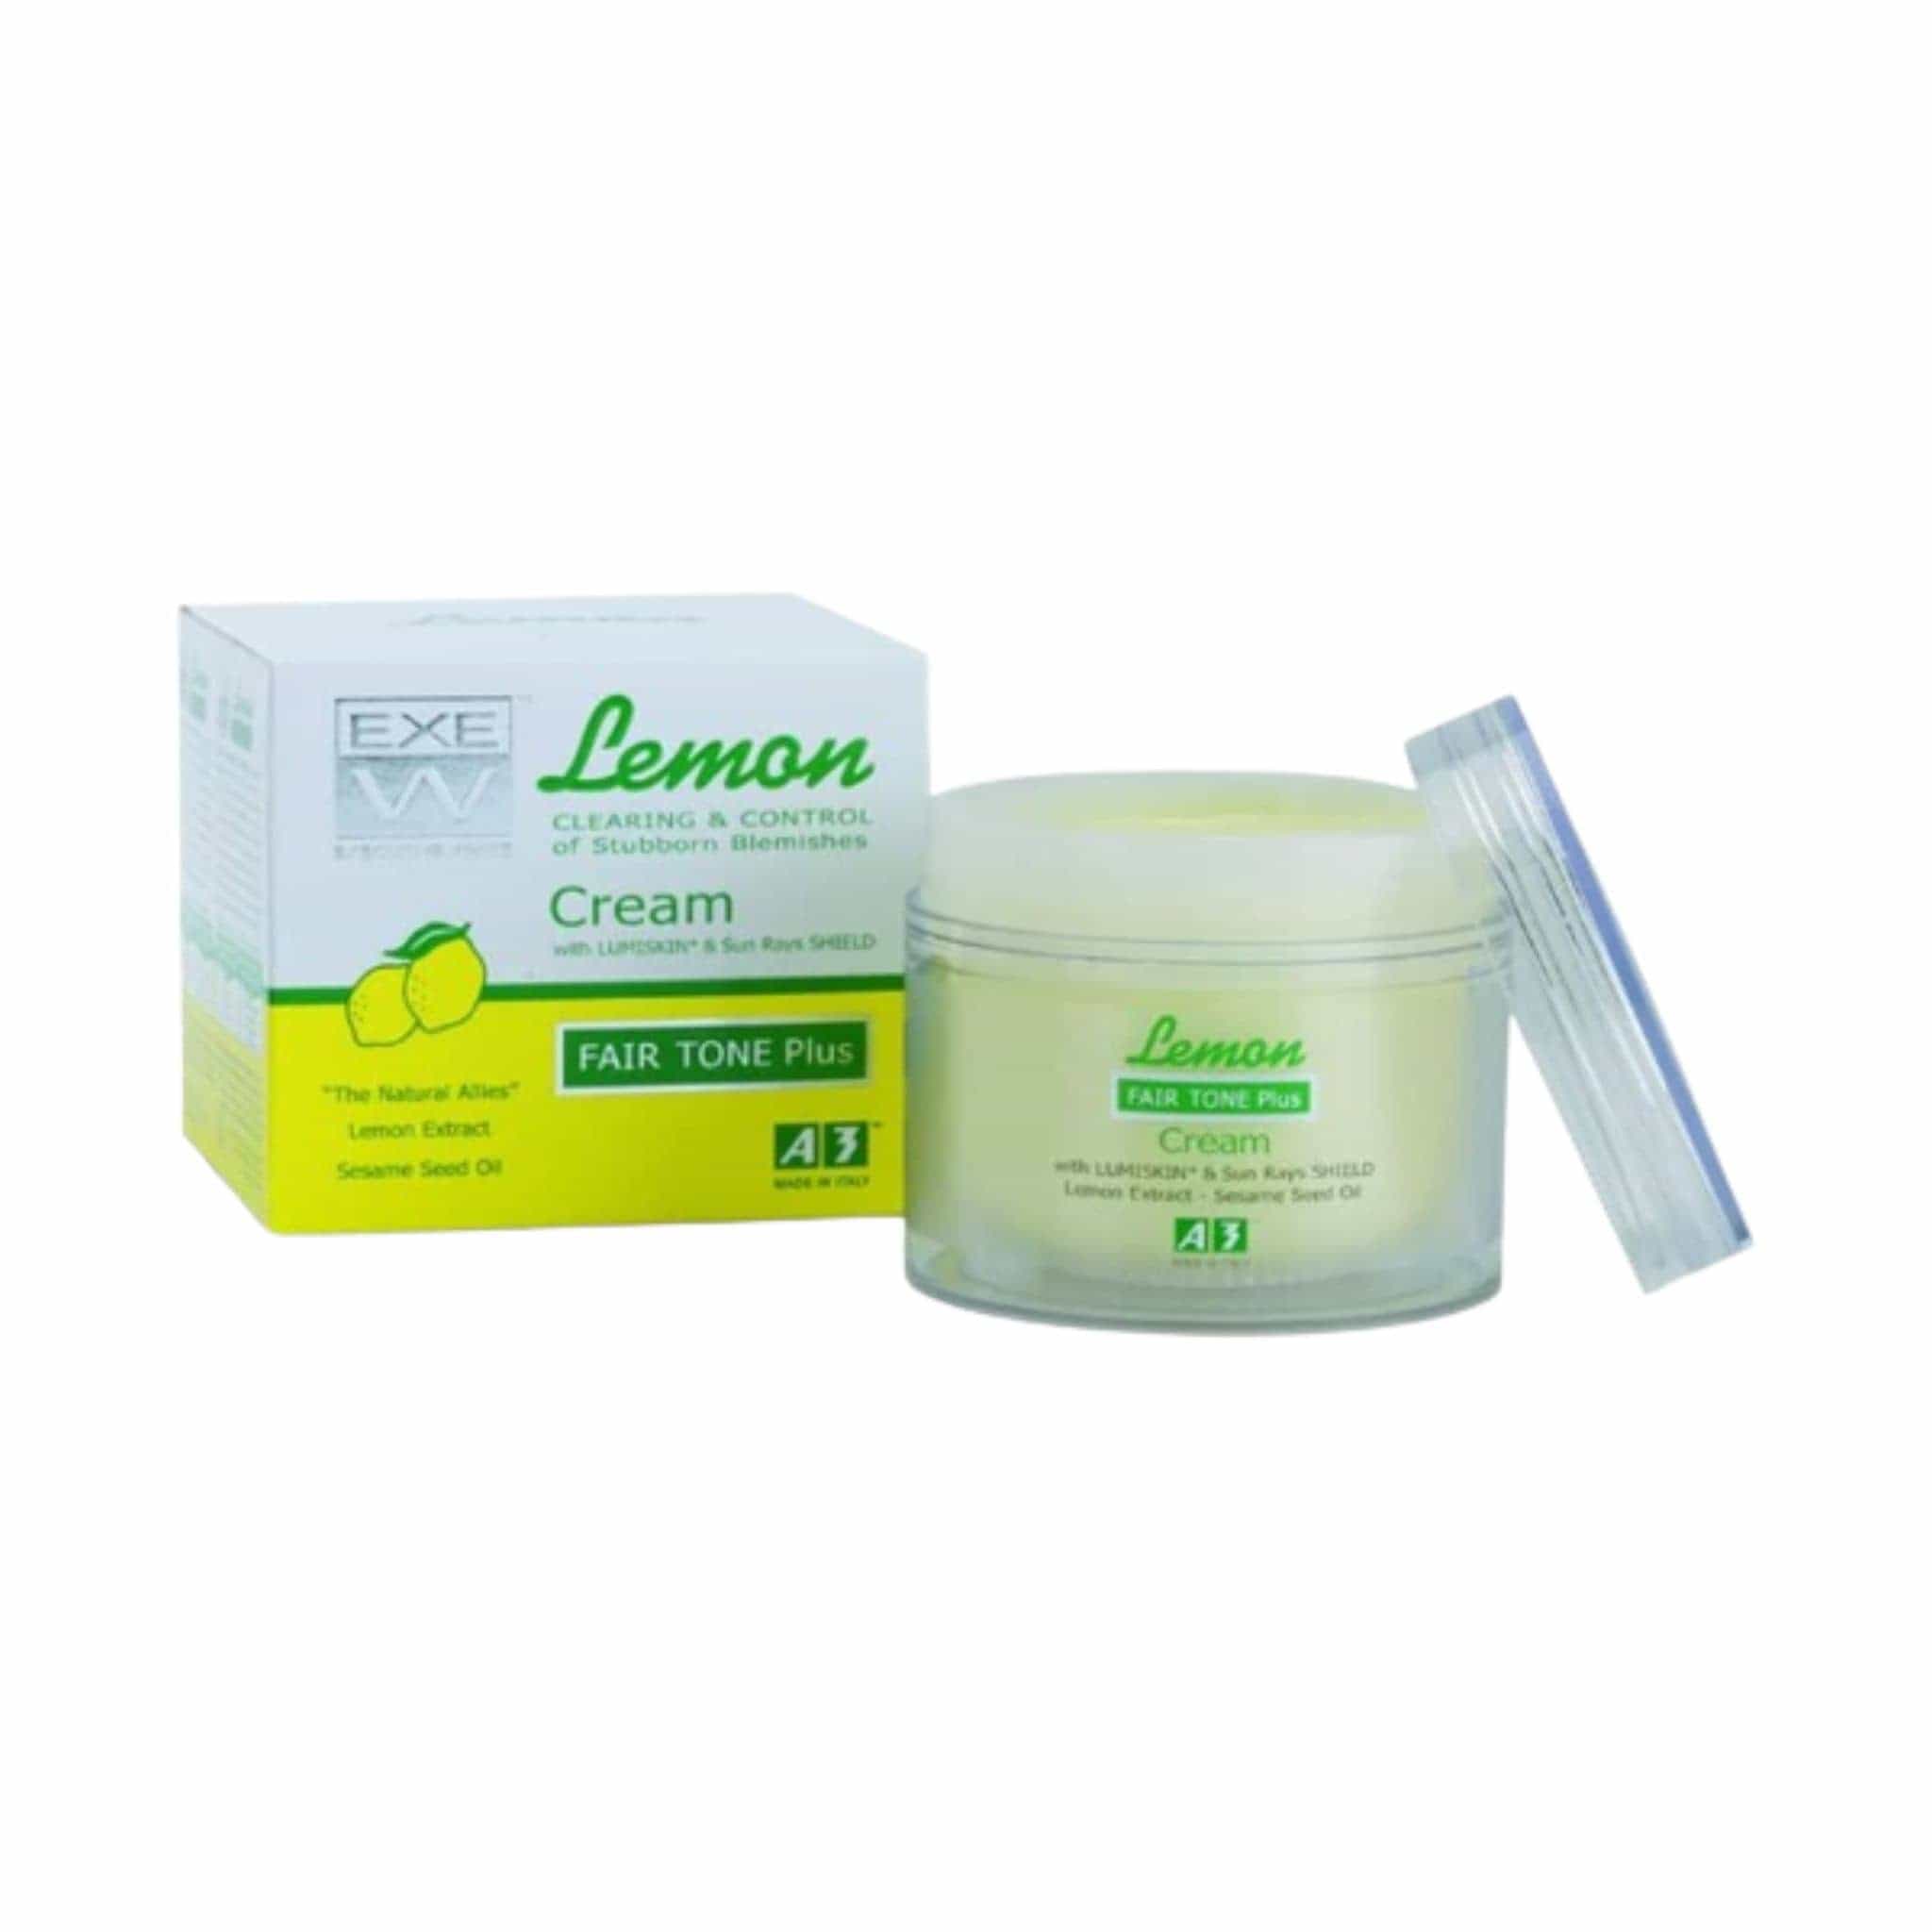 A3 Lemon Cream Clearing & Control of Stubborn Blemishes 150ml